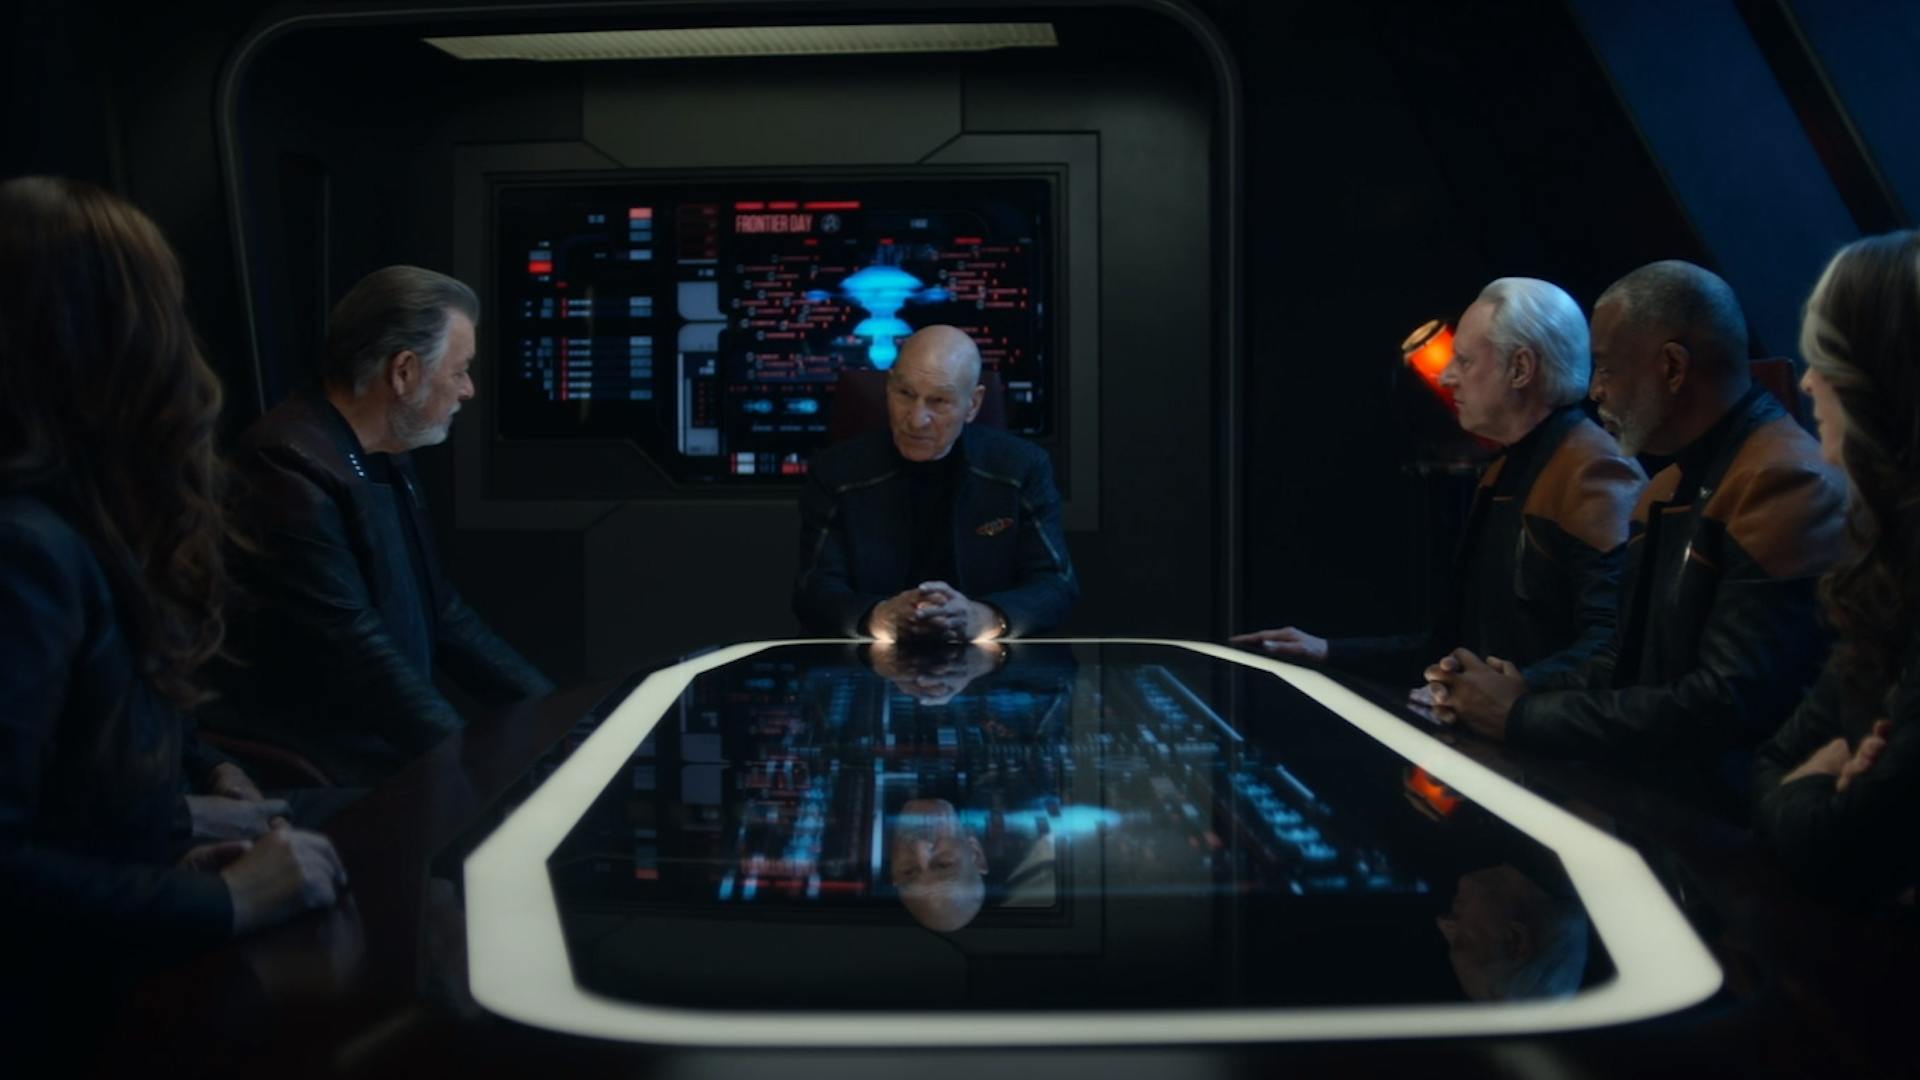 Picard's old crew (Worf, Riker, Geordi, Data, Deanna Troi, Beverly Crusher) all reunited and sitting around the table on the Titan